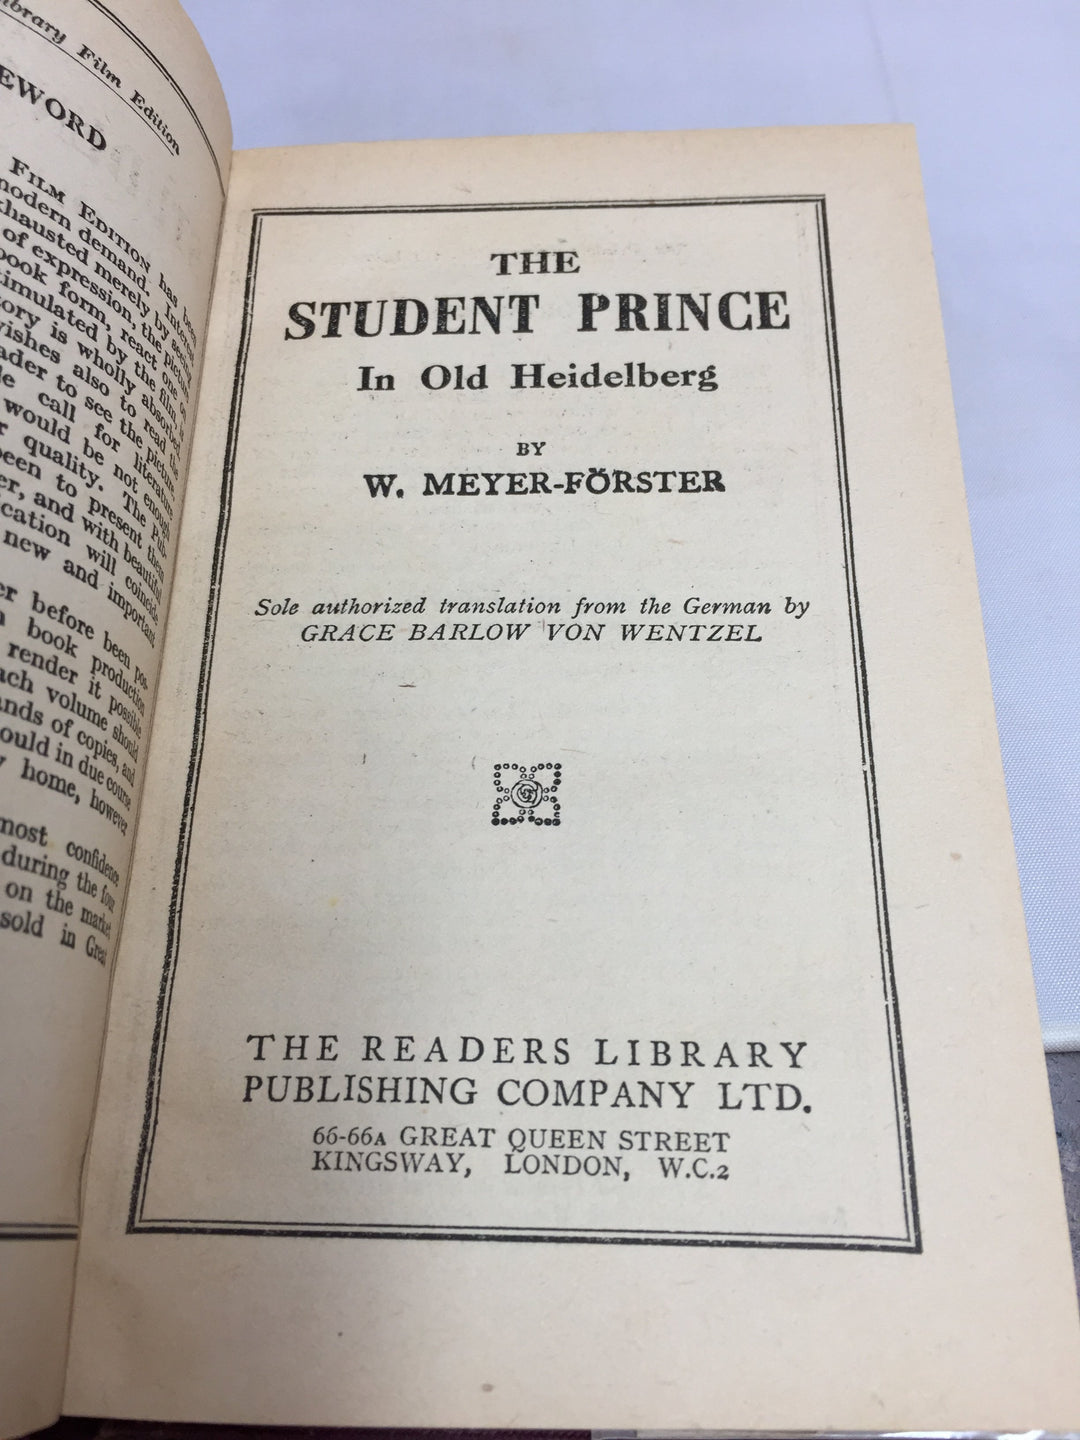 Meyer-Forster, W - The Student Prince in Old Heidelberg | image6